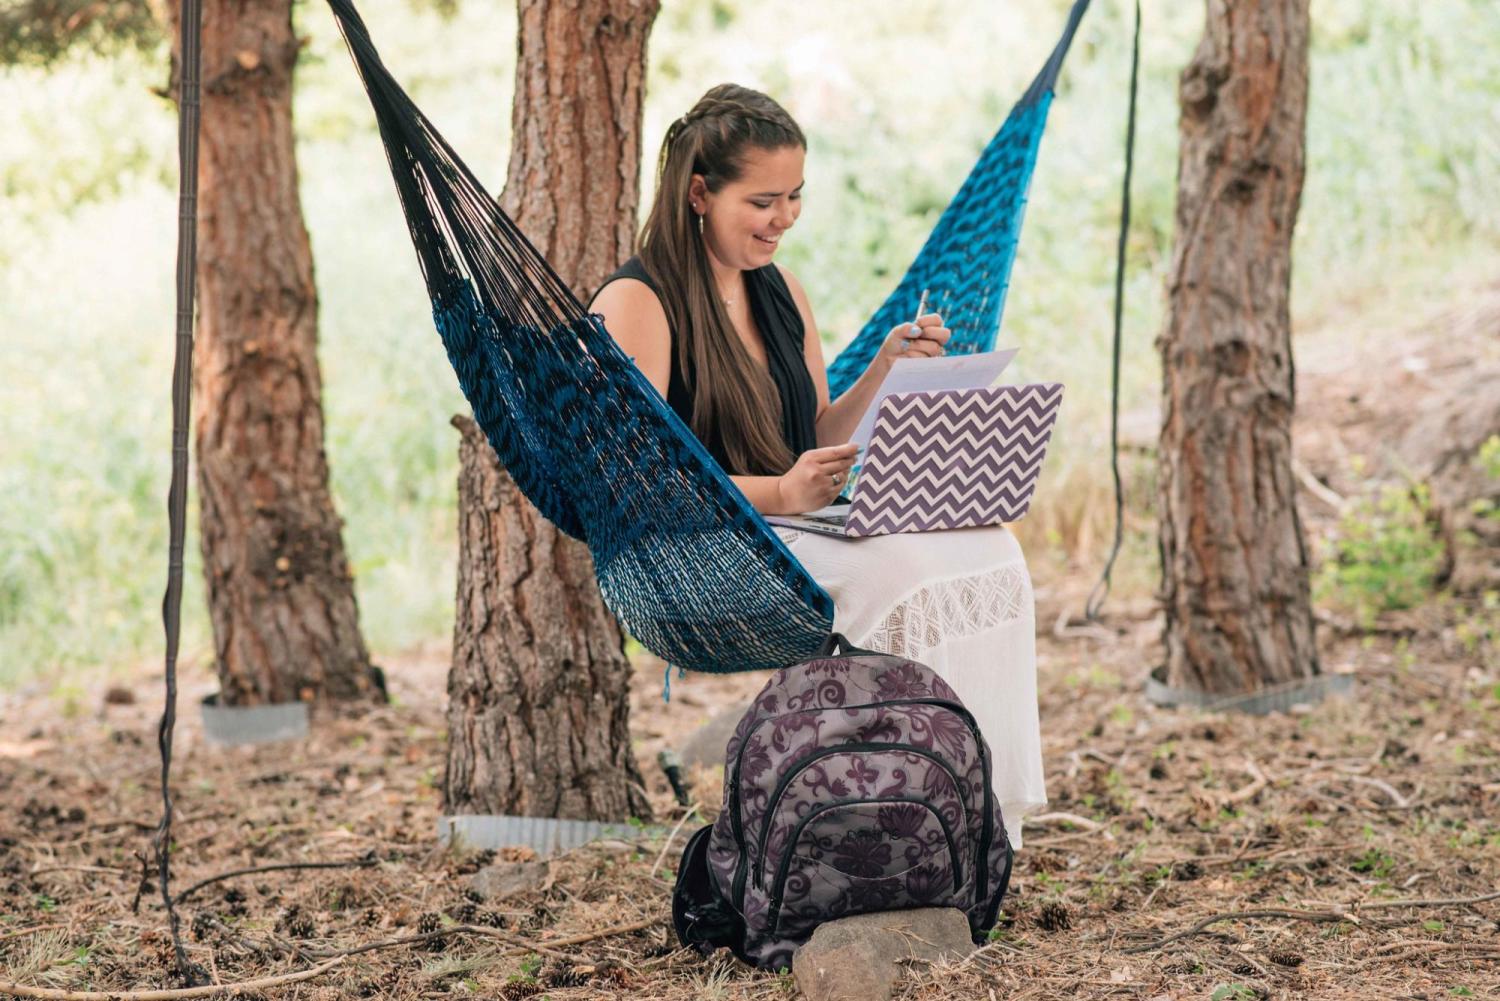 A student sits in a hammock outside while working on her laptop